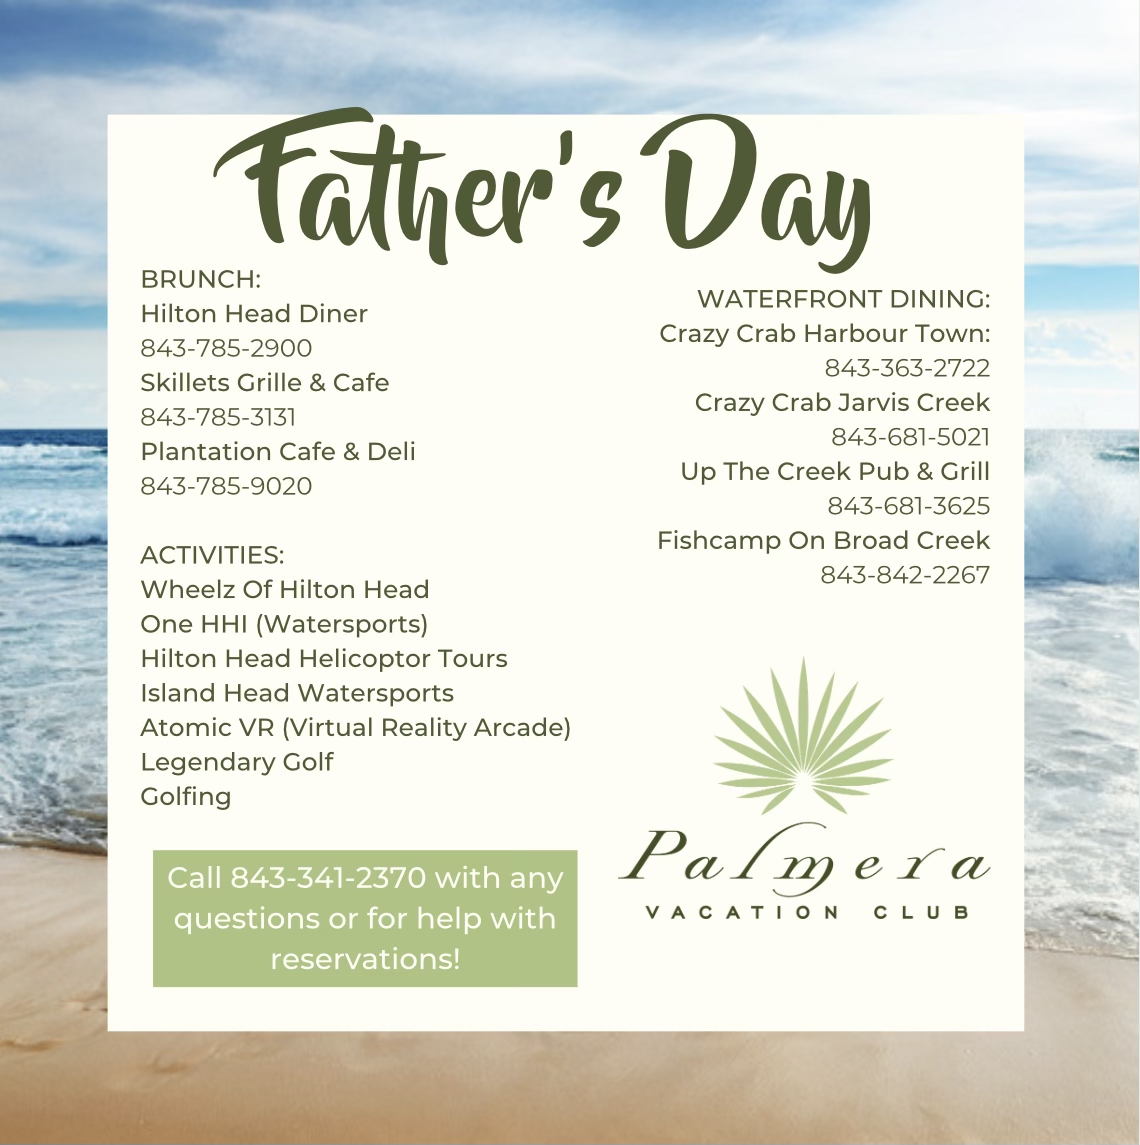 Make Your Father’s Day Reservations Today! Palmera Vacation Club